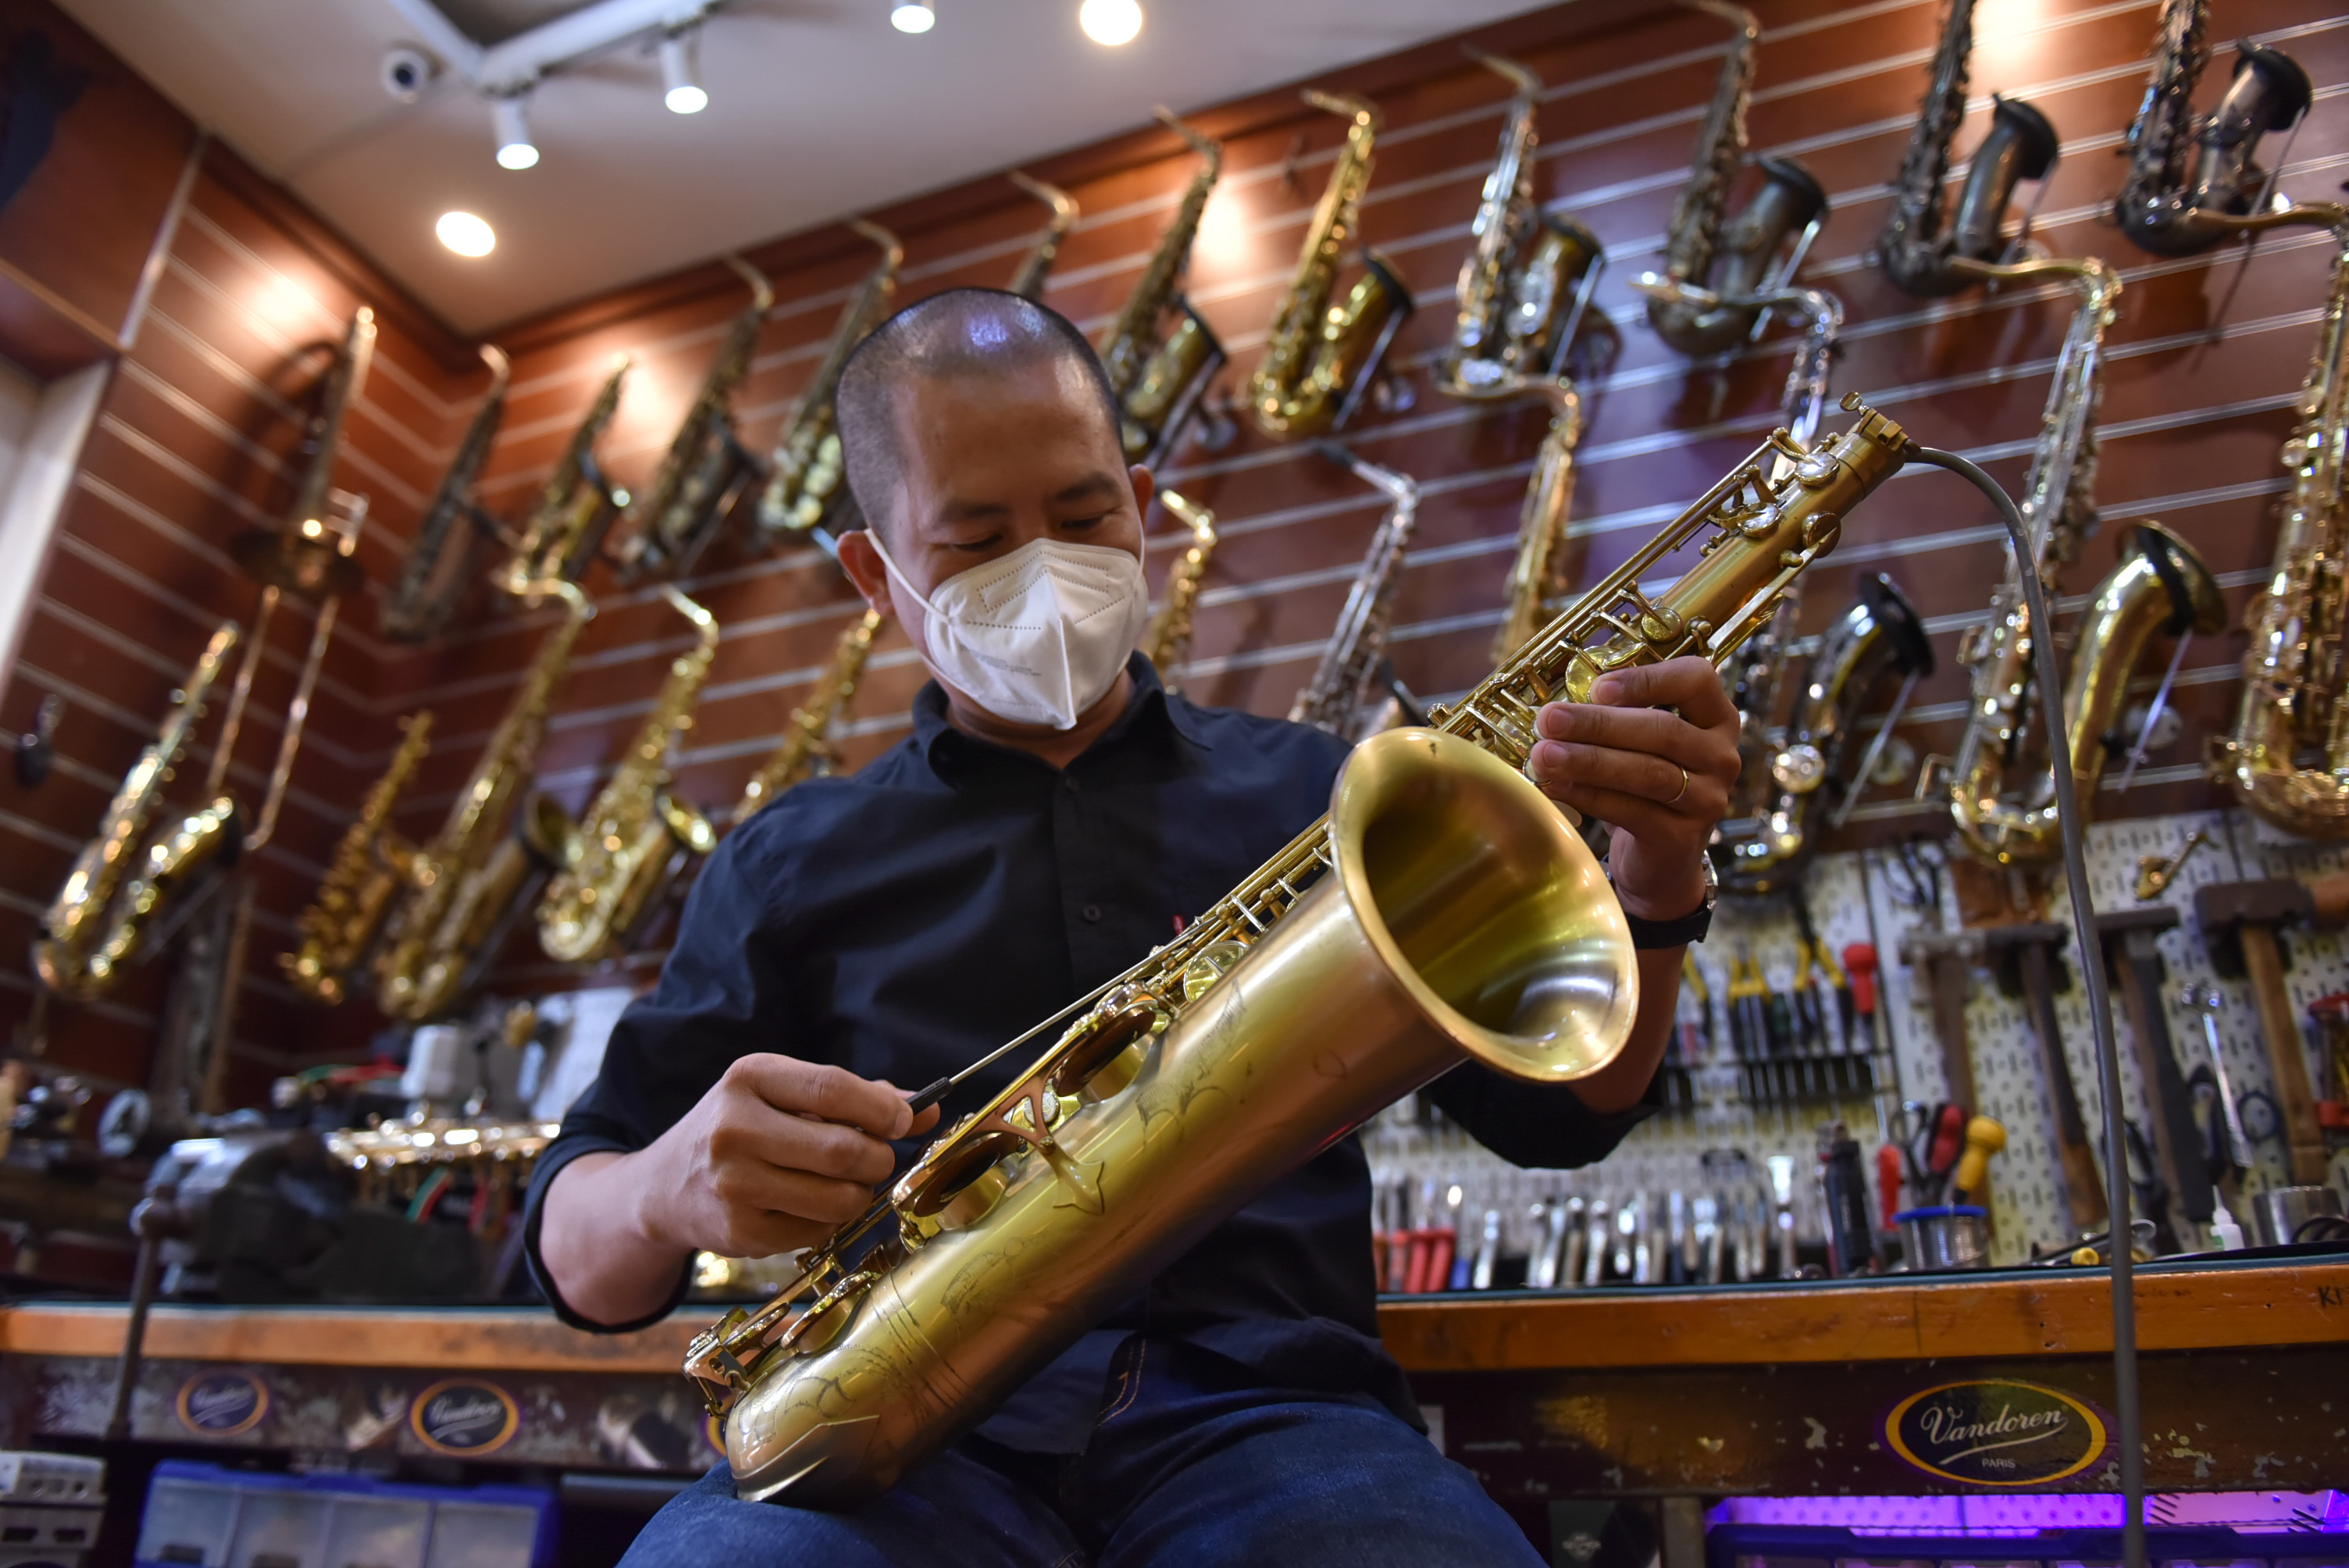 Man repairs saxophones for over two decades in Ho Chi Minh City